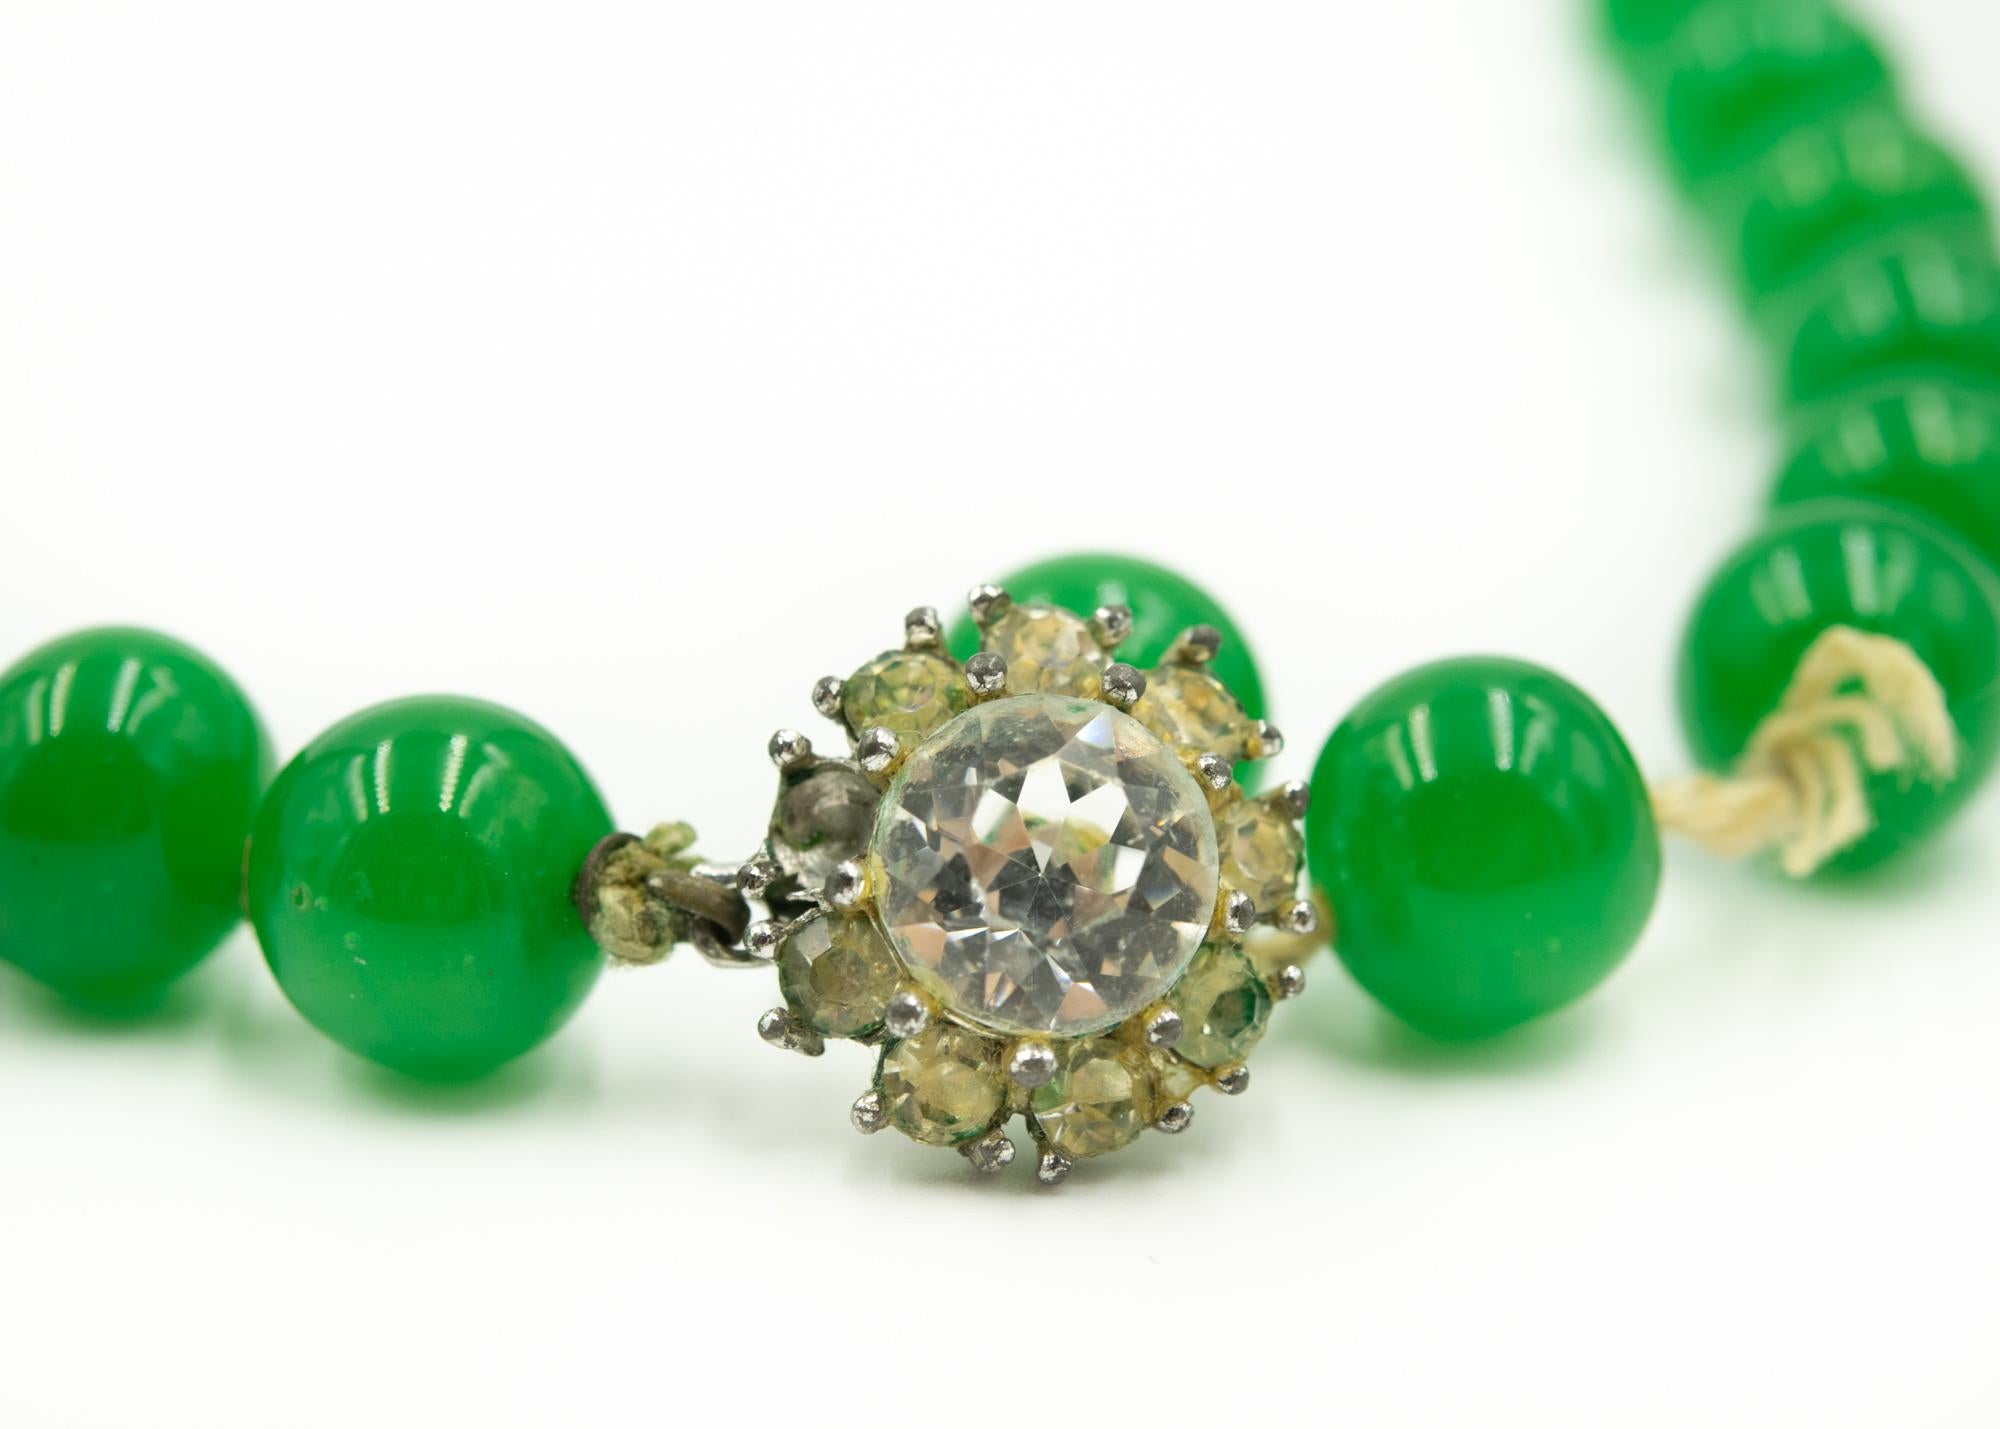 1950's Imperial green Peking glass beaded necklace hand knotted on string with a rhinestone clasp. The beads are approximately 9.75 mm, matched, and round. The color and look of the necklace simulates imperial jade. The necklace is 20 3/4